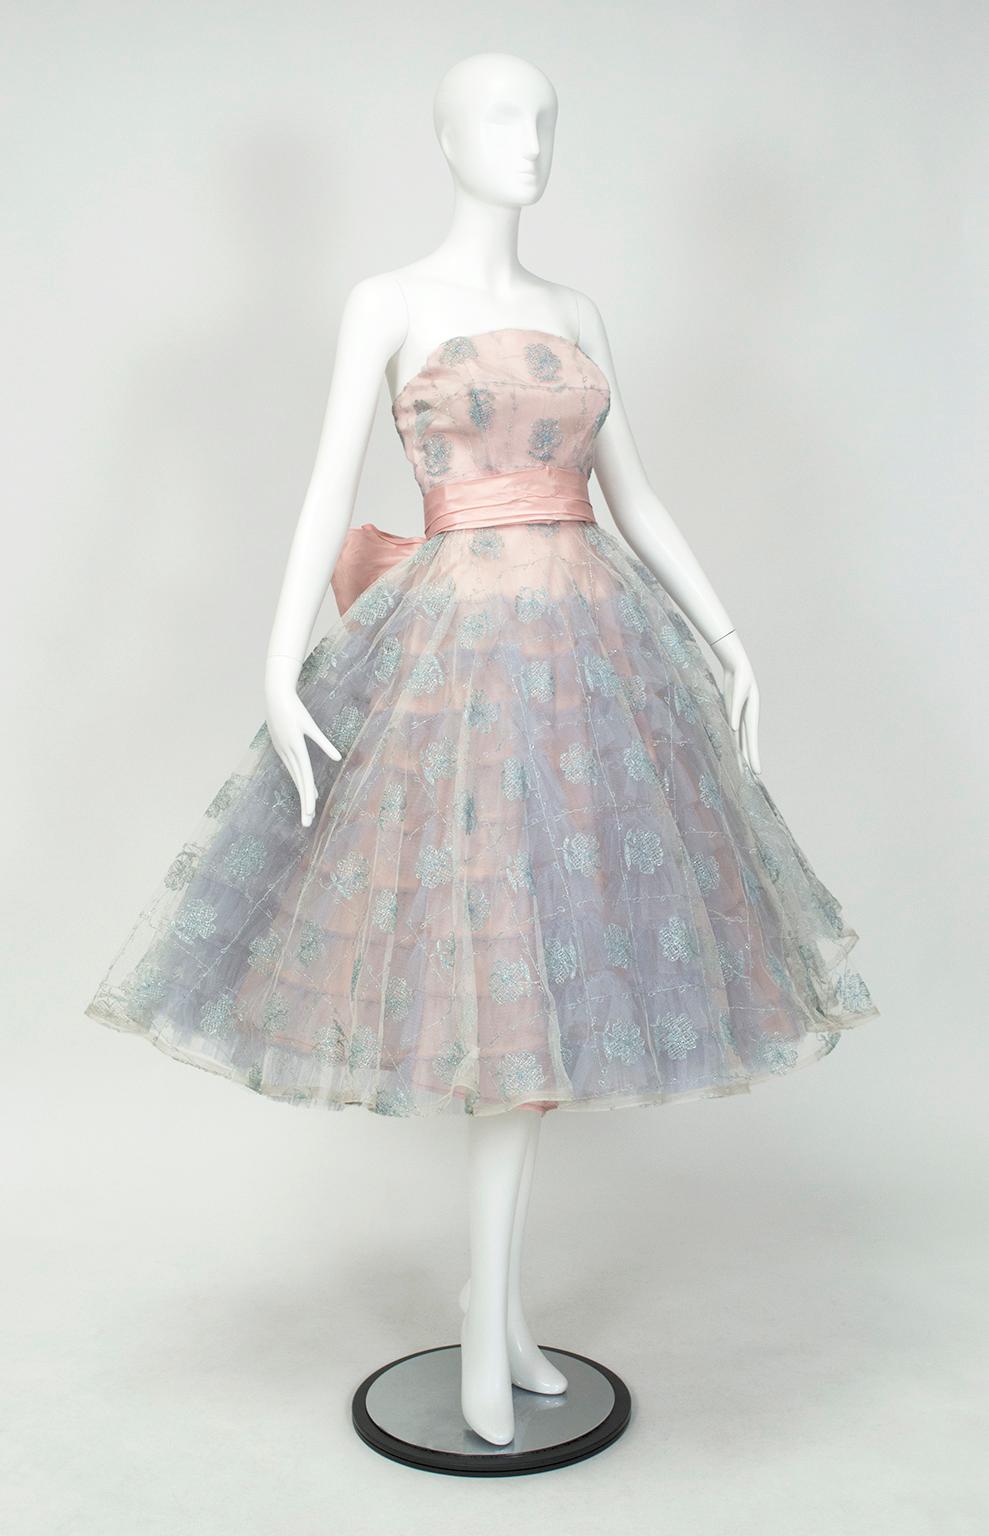 Pure spun-sugar perfection, right down to the cotton candy colors. Visible beneath the silver lattice-embroidered top skirt, the ruffled attached petticoat provides volume enough to span nearly six feet. Not to be outdone, the massive center rear